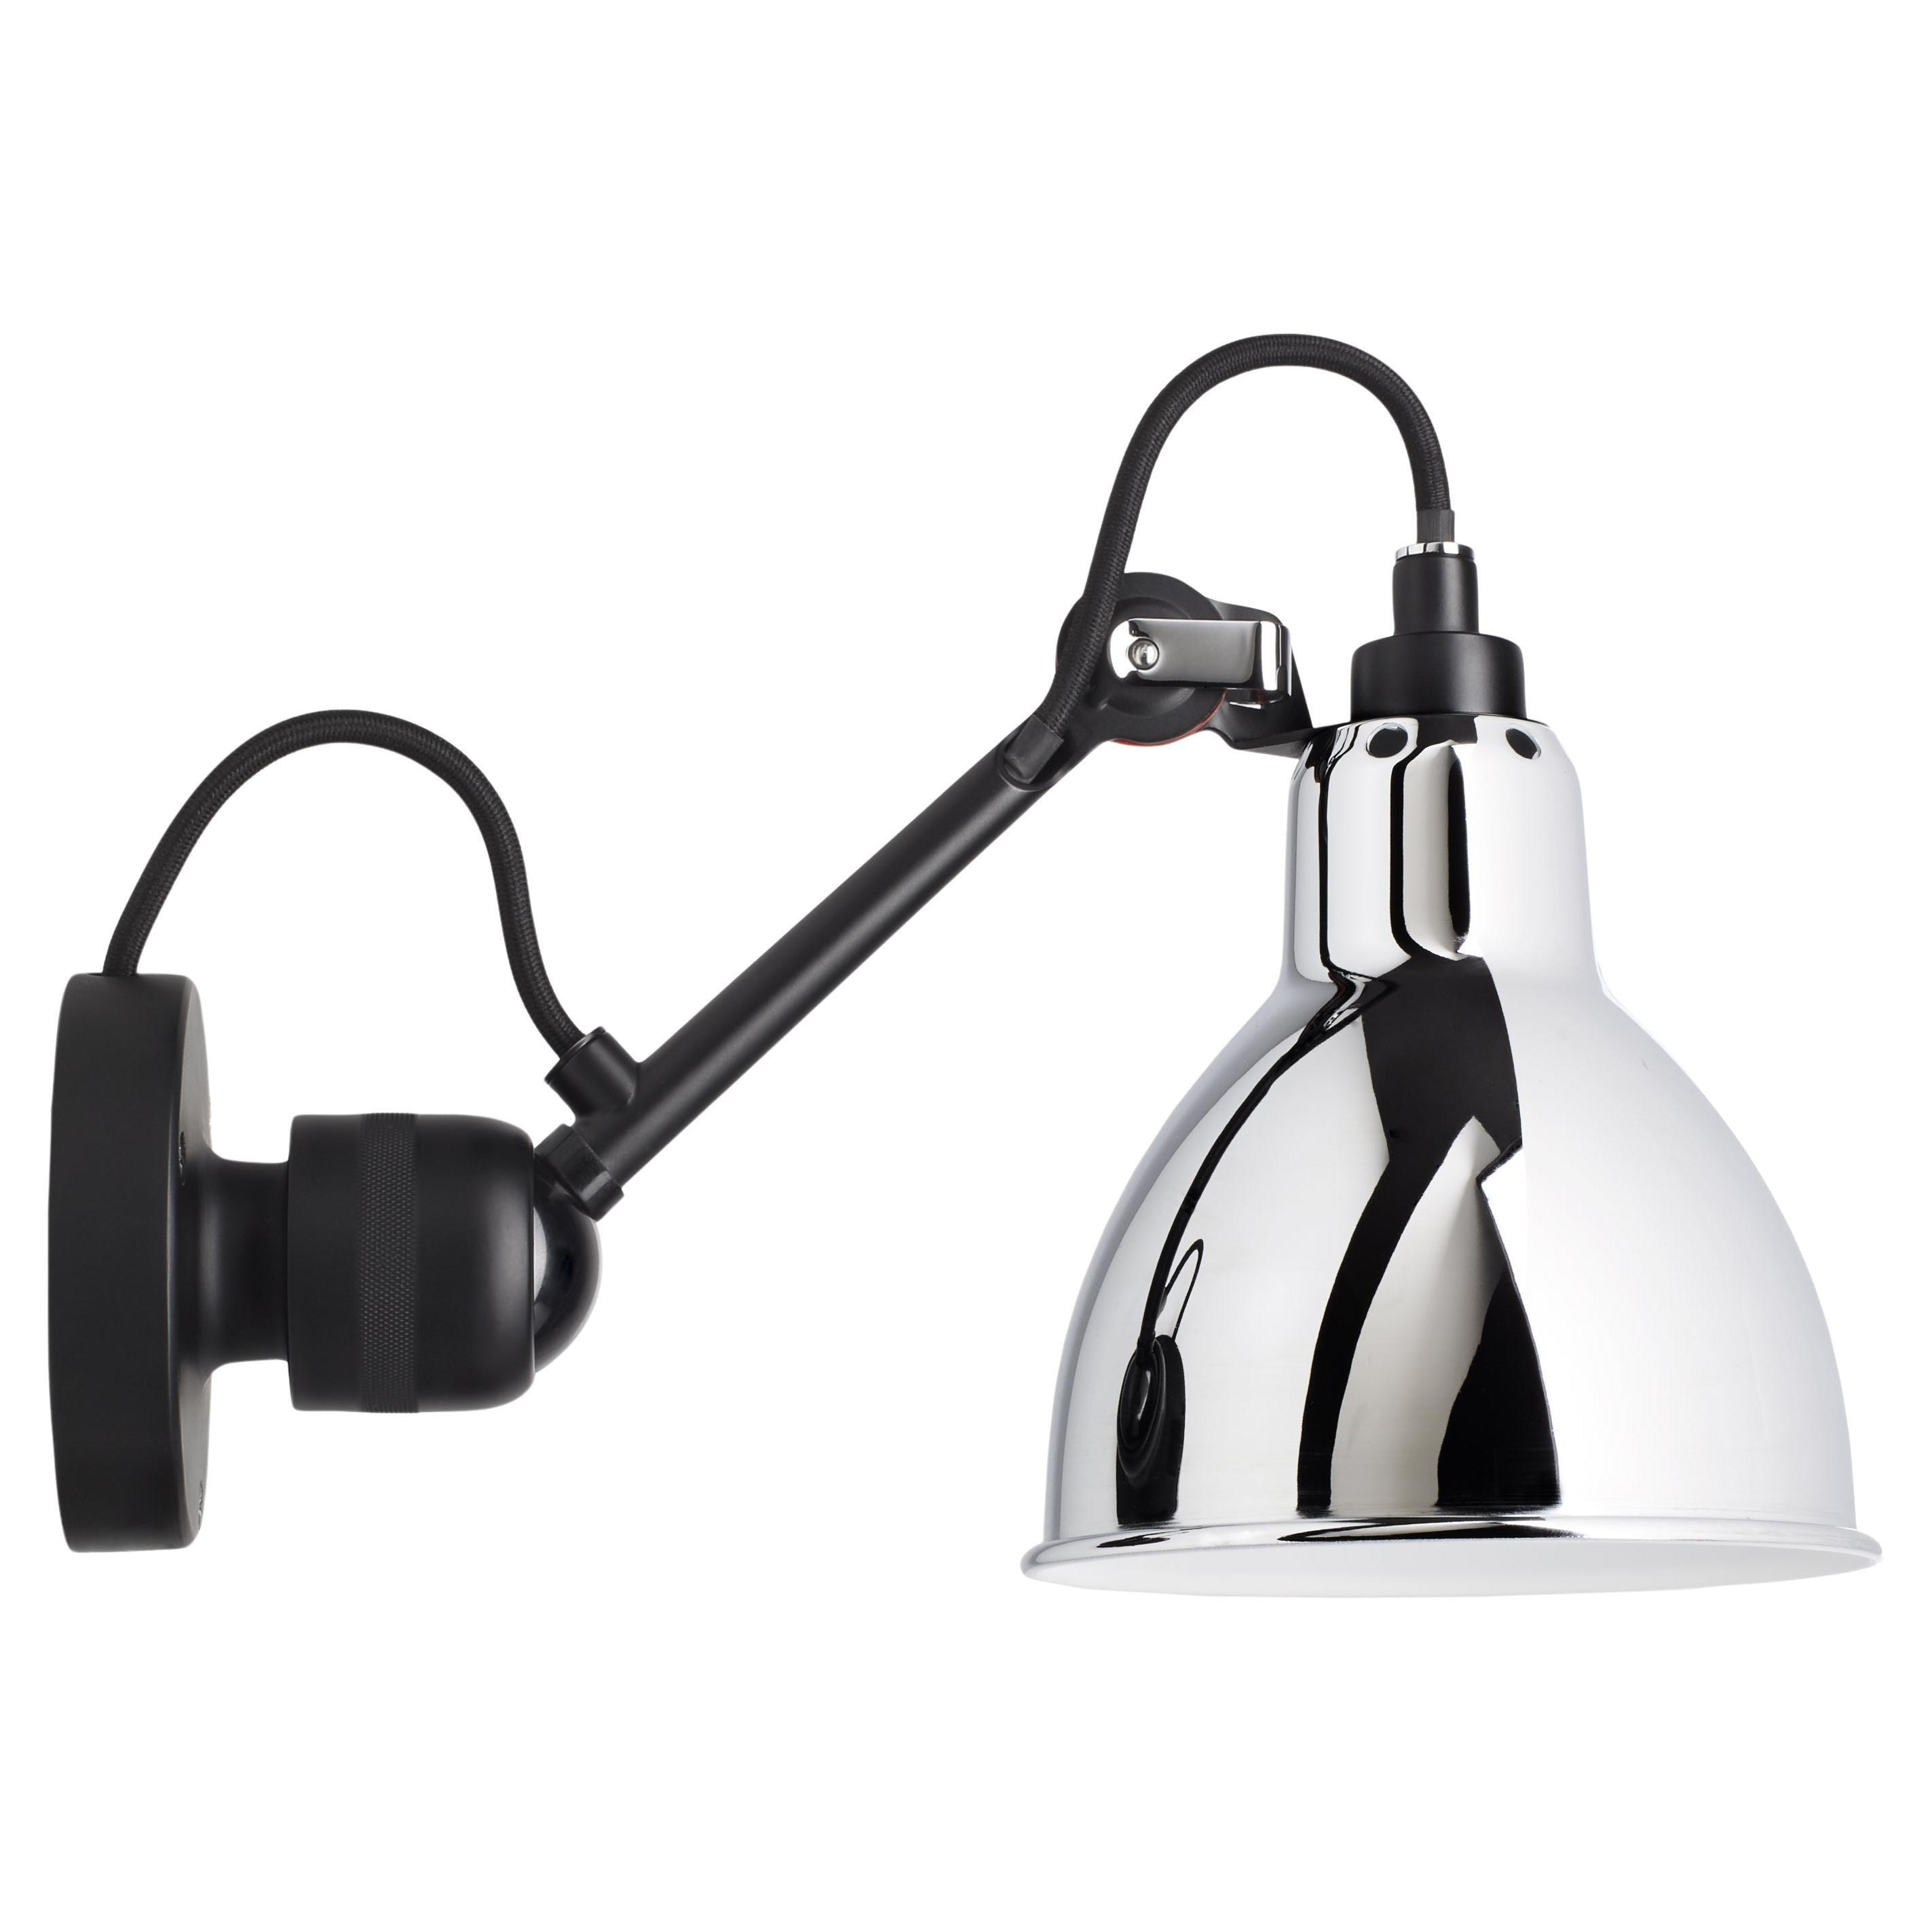 DCW Editions La Lampe Gras N°304 Wall Lamp in Black Arm and Chrome Shade For Sale